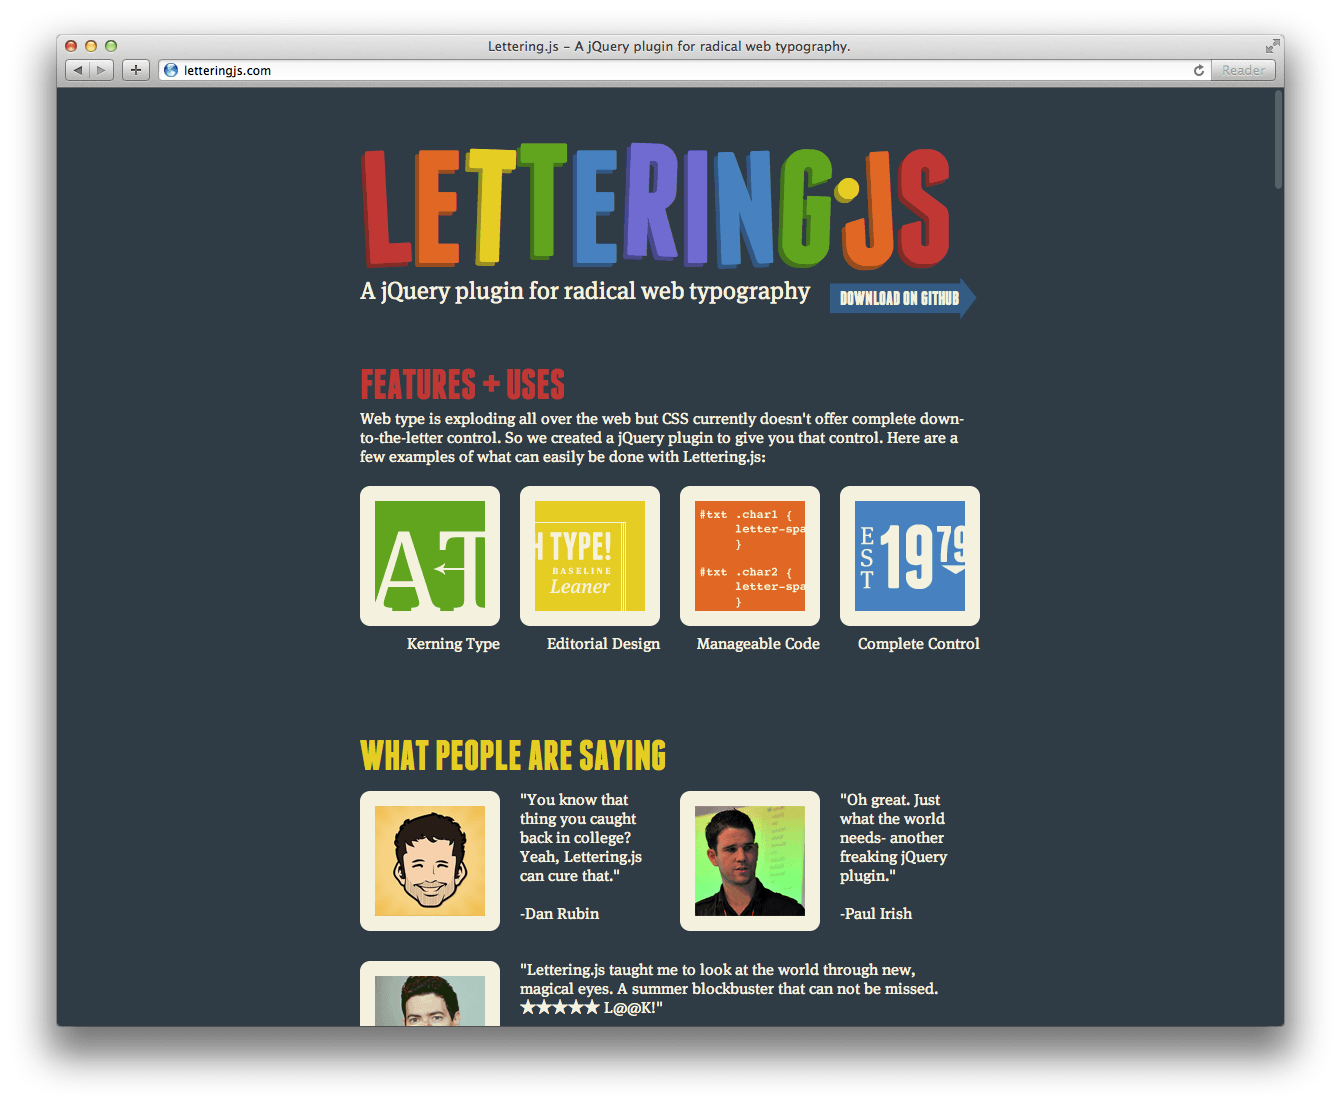 Lettering.js - A jQuery plugin for radical web typography.